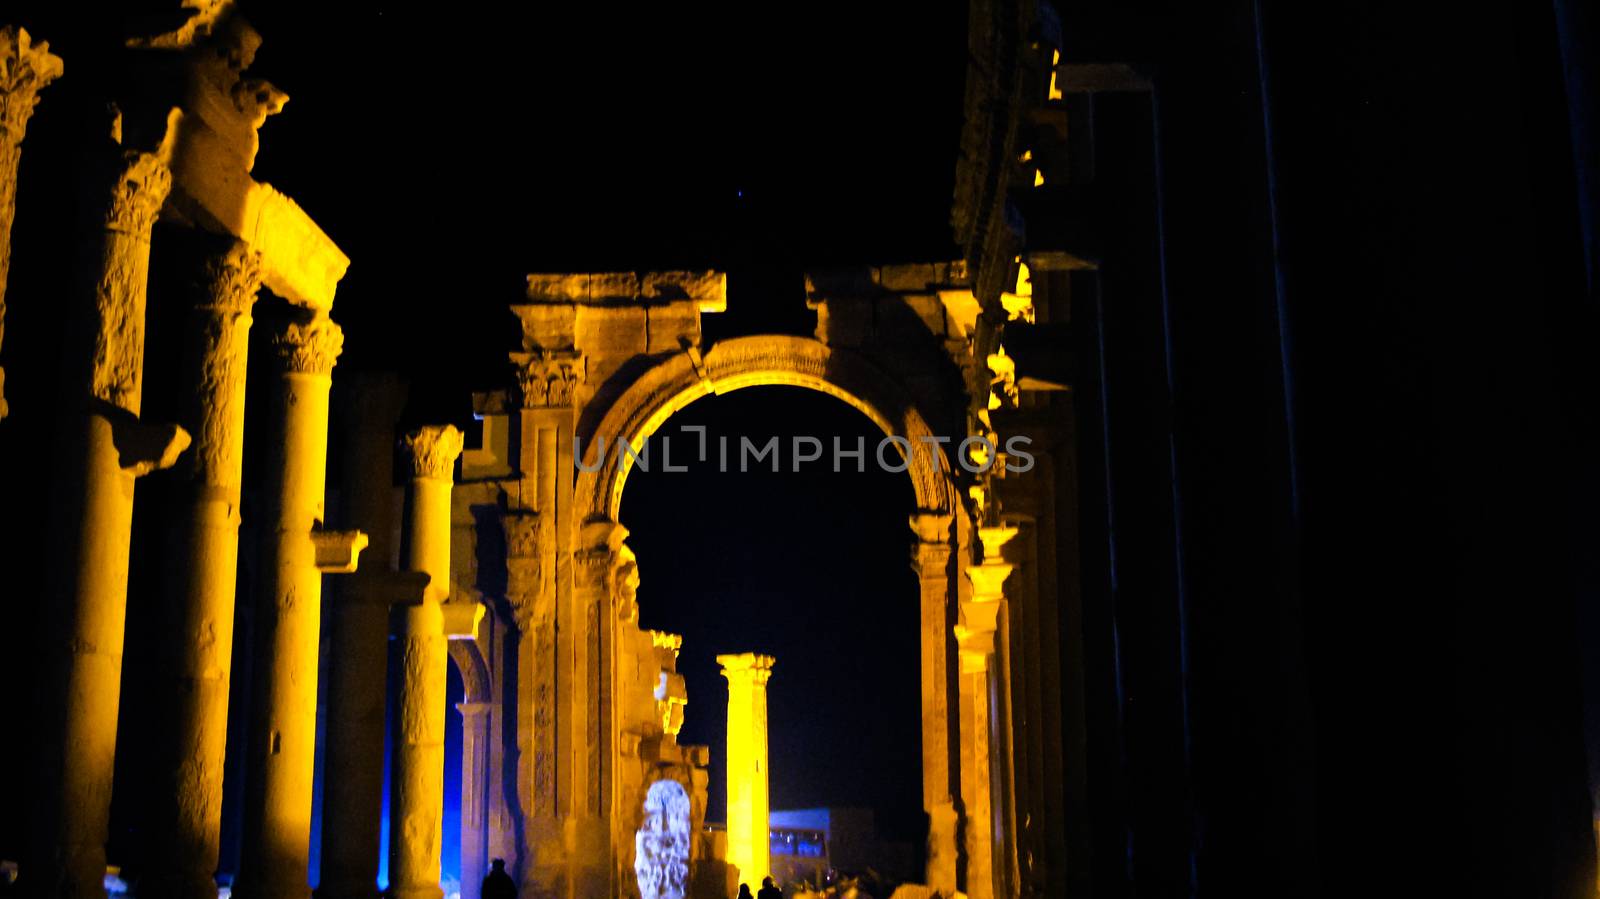 Palmyra columns in the night, destroyed by DAESH, Syria by homocosmicos